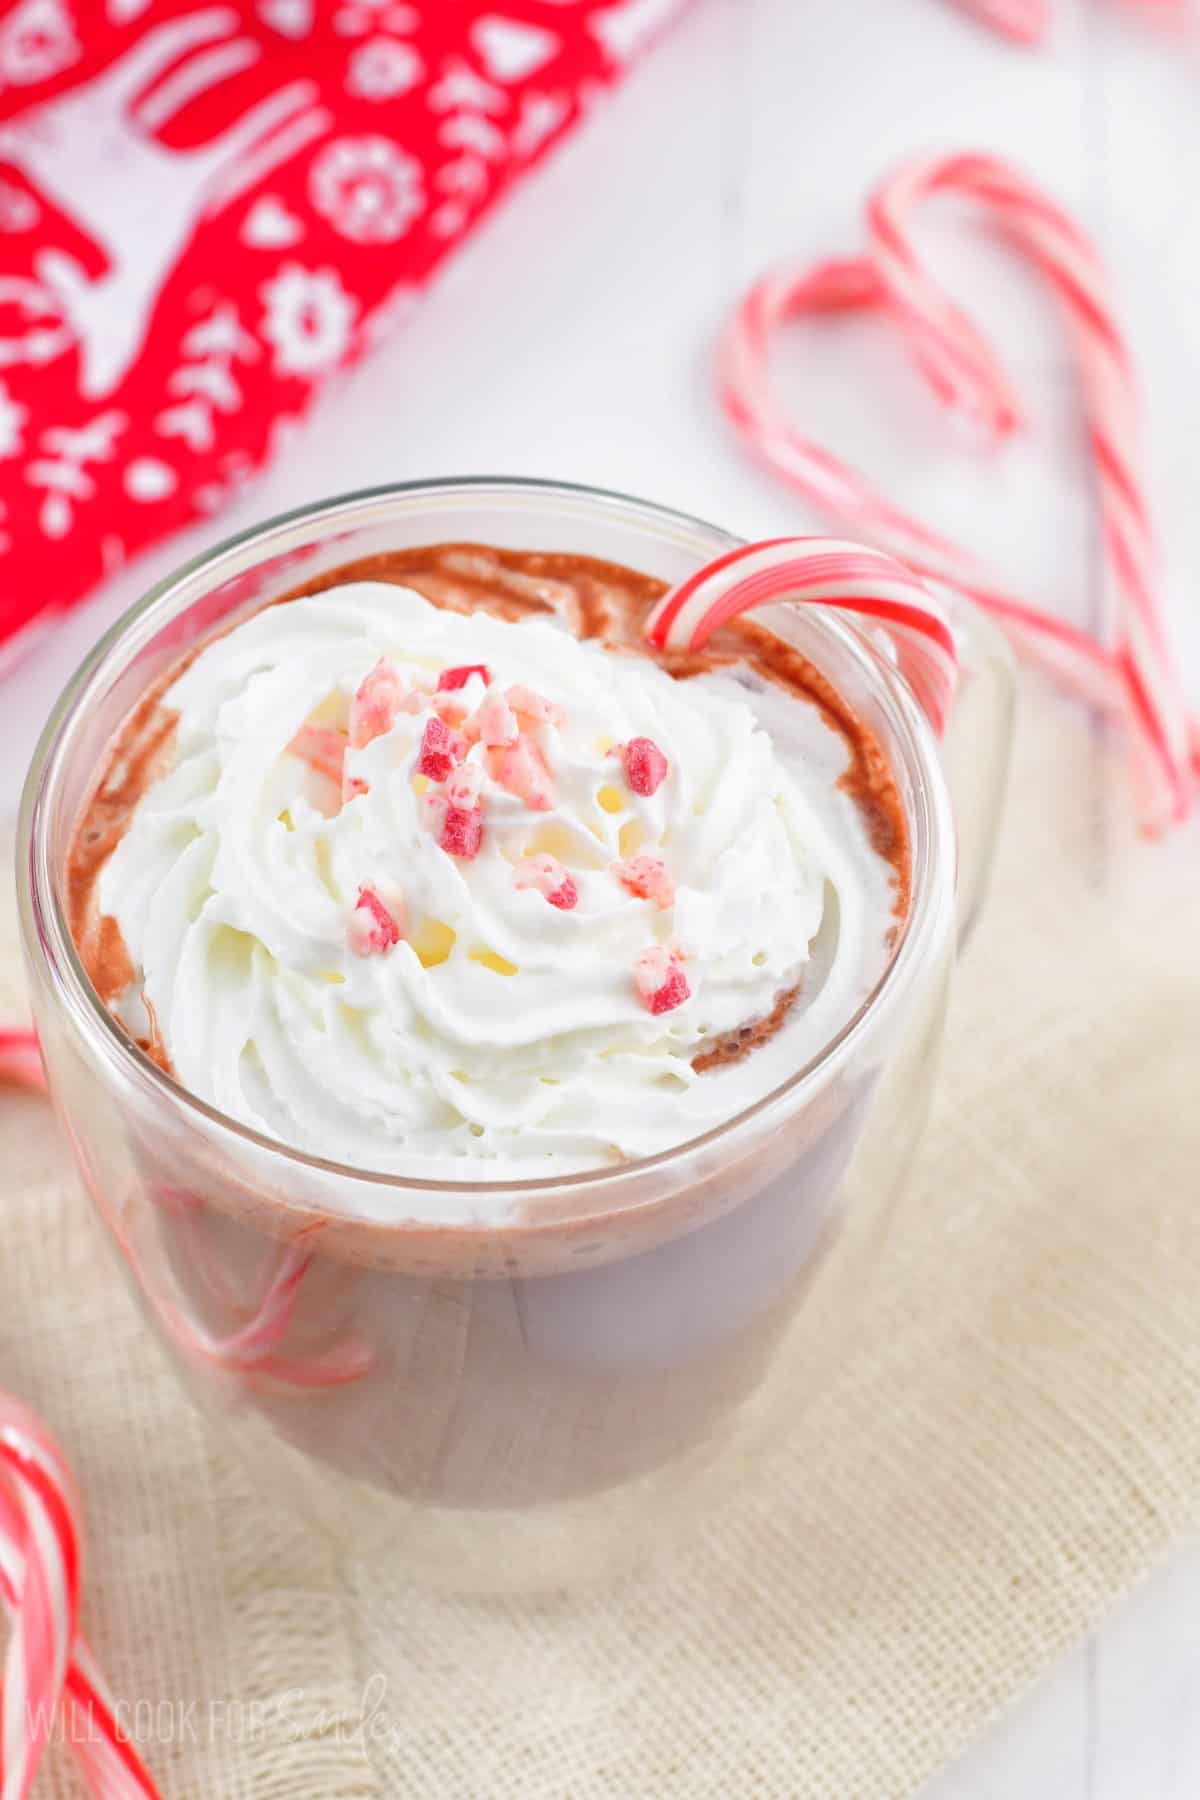 a glass mug of hot chocolate topped with whipped cream, peppermint crunch, and candy canes around.